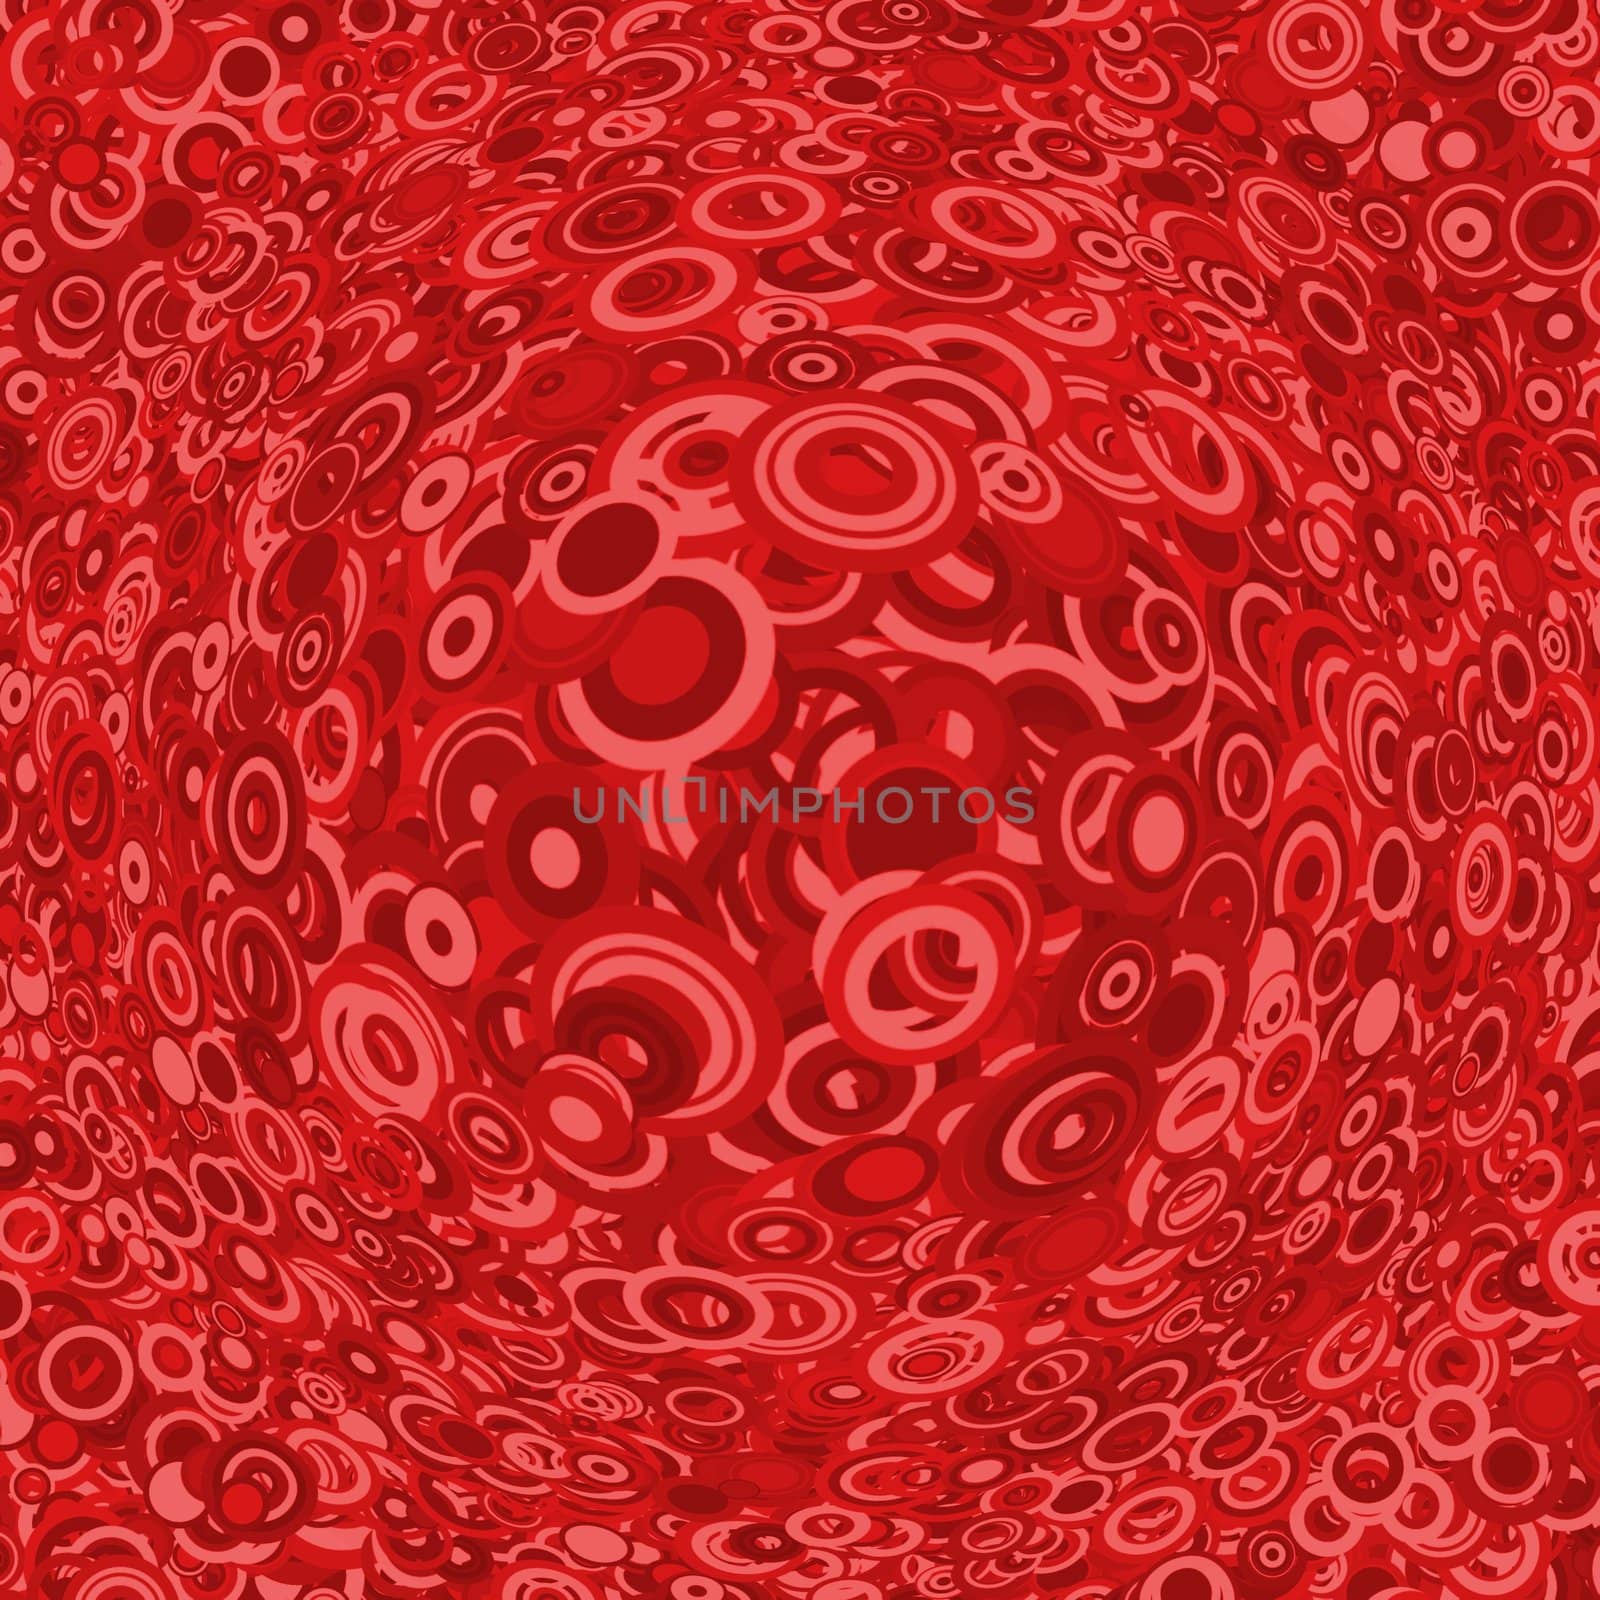 Abstract illustration of lots of red circles with a bulge in the middle